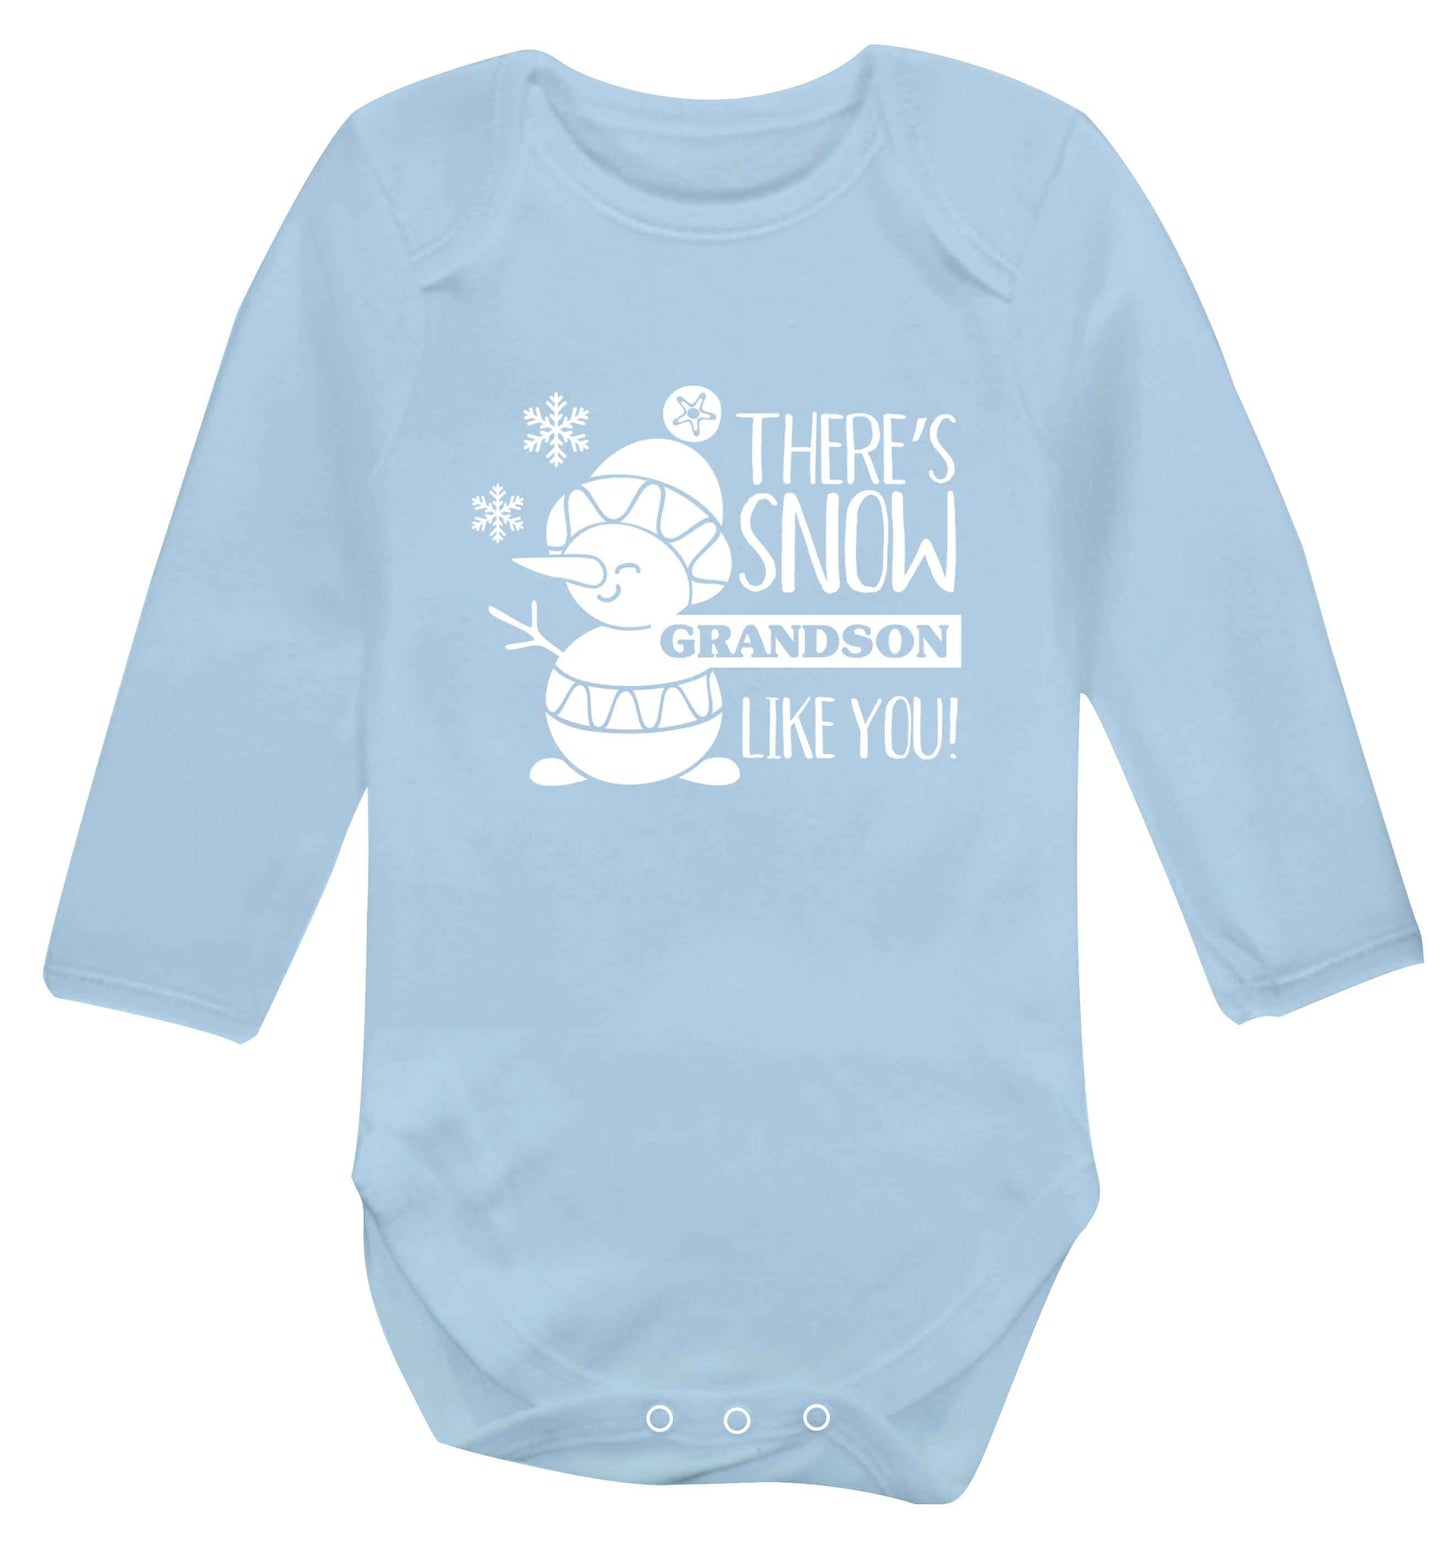 There's snow grandson like you baby vest long sleeved pale blue 6-12 months